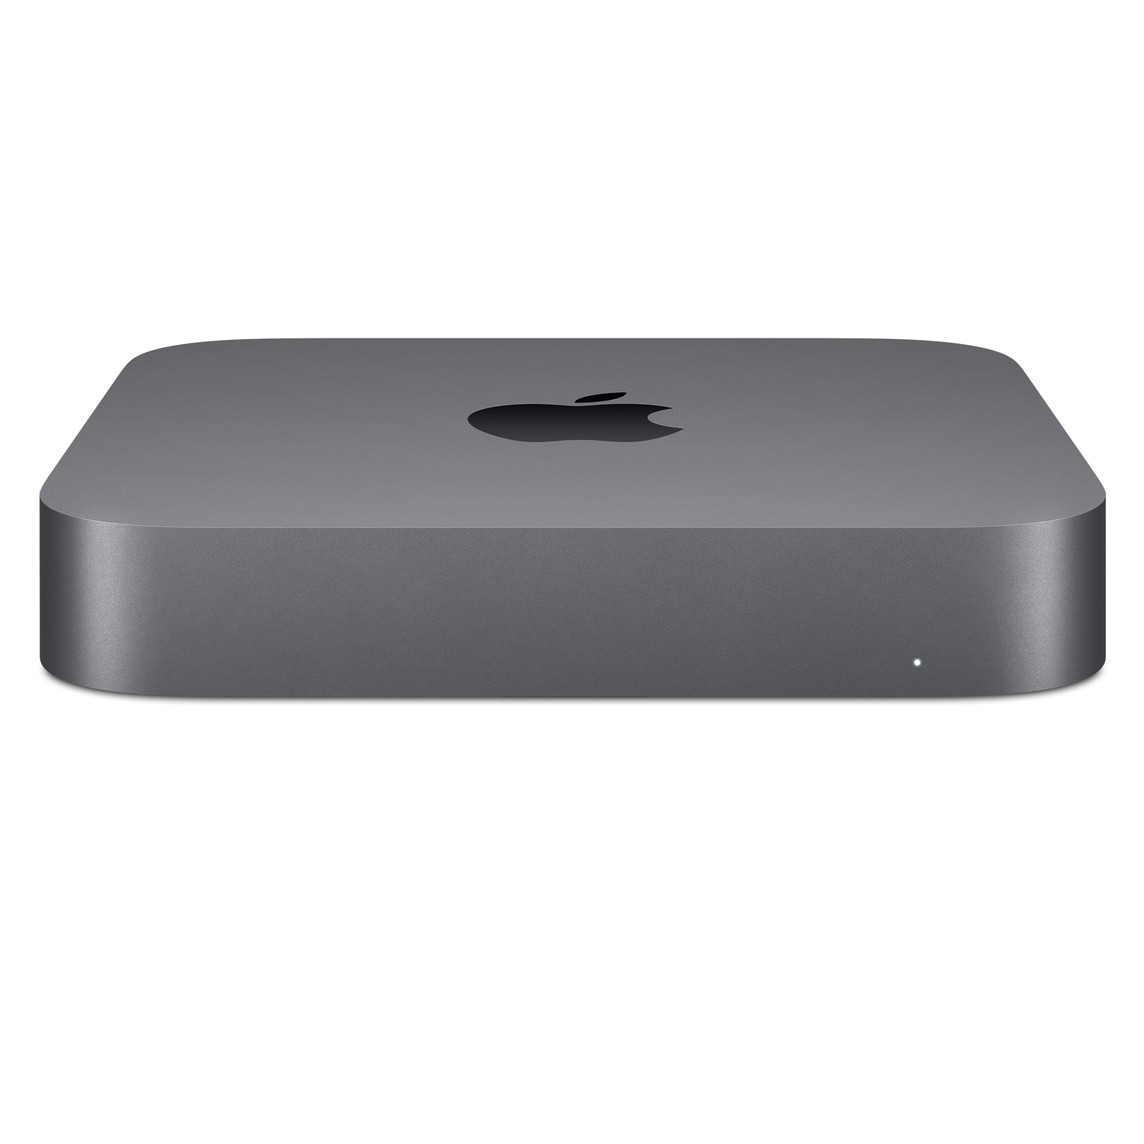 Front of Mac mini showing the Apple logo on top